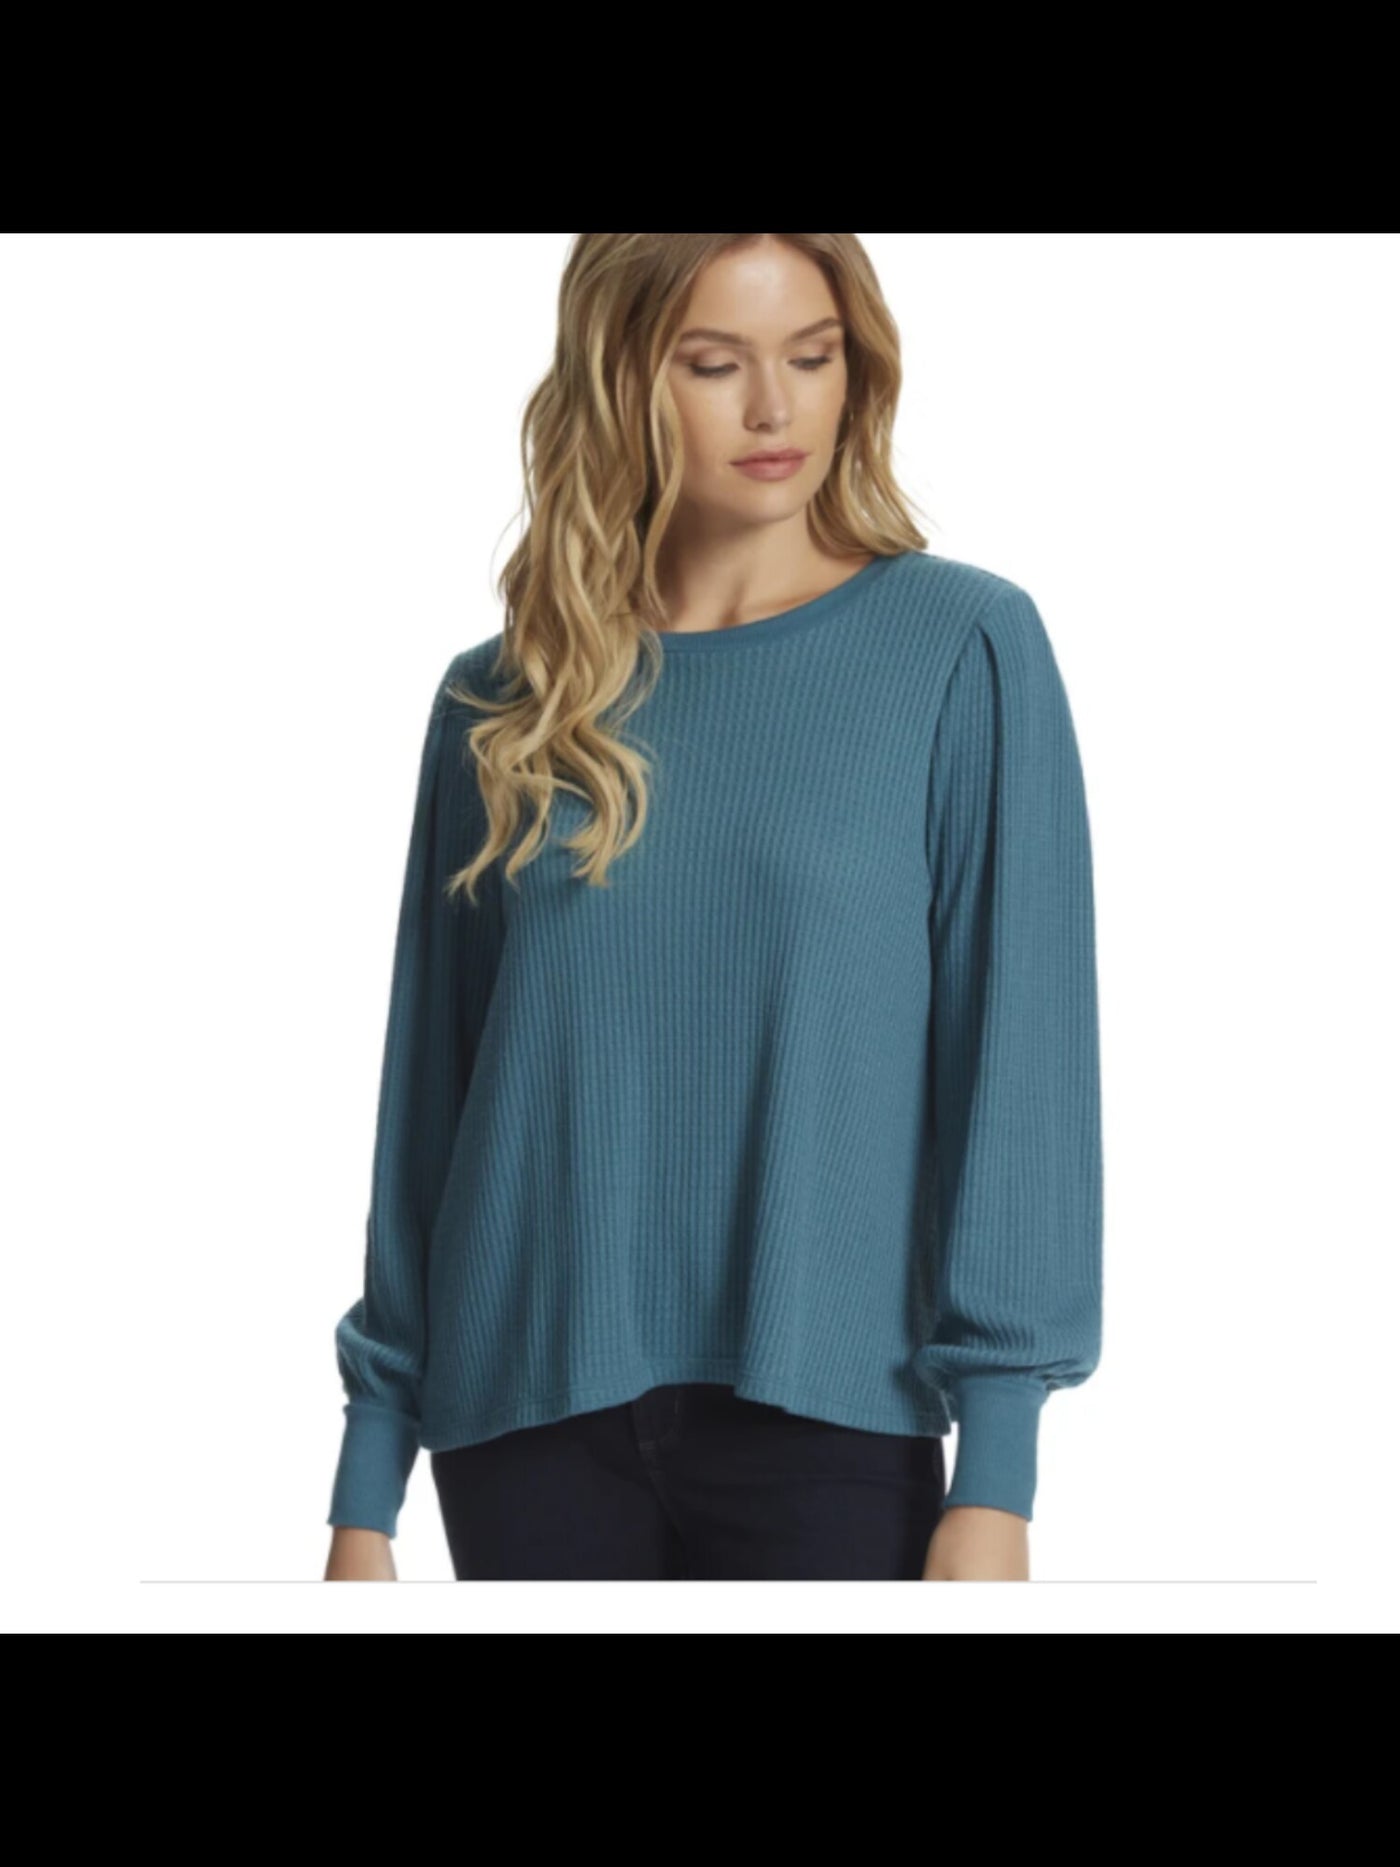 JESSICA SIMPSON Womens Teal Stretch Ribbed Jewel Neck Sweater XS